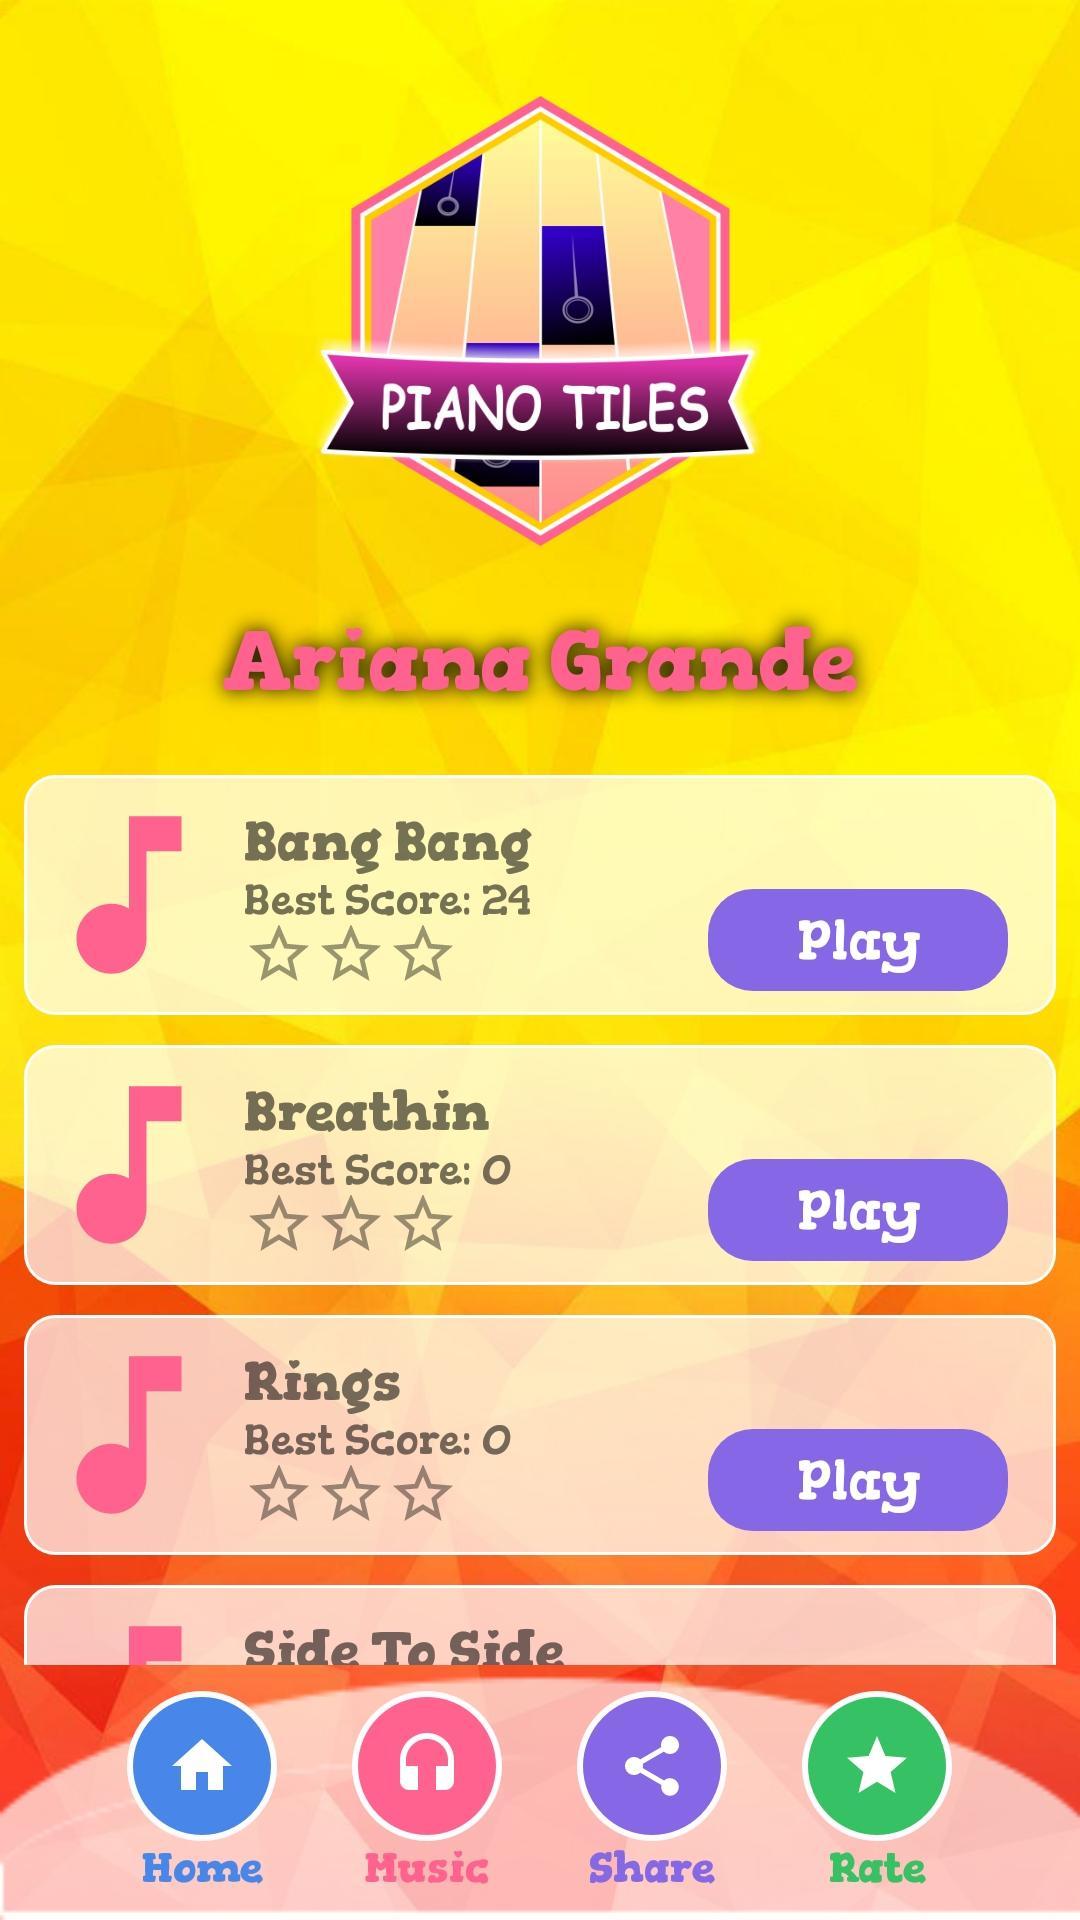 7 Rings Ariana Grande Piano Tiles For Android Apk Download